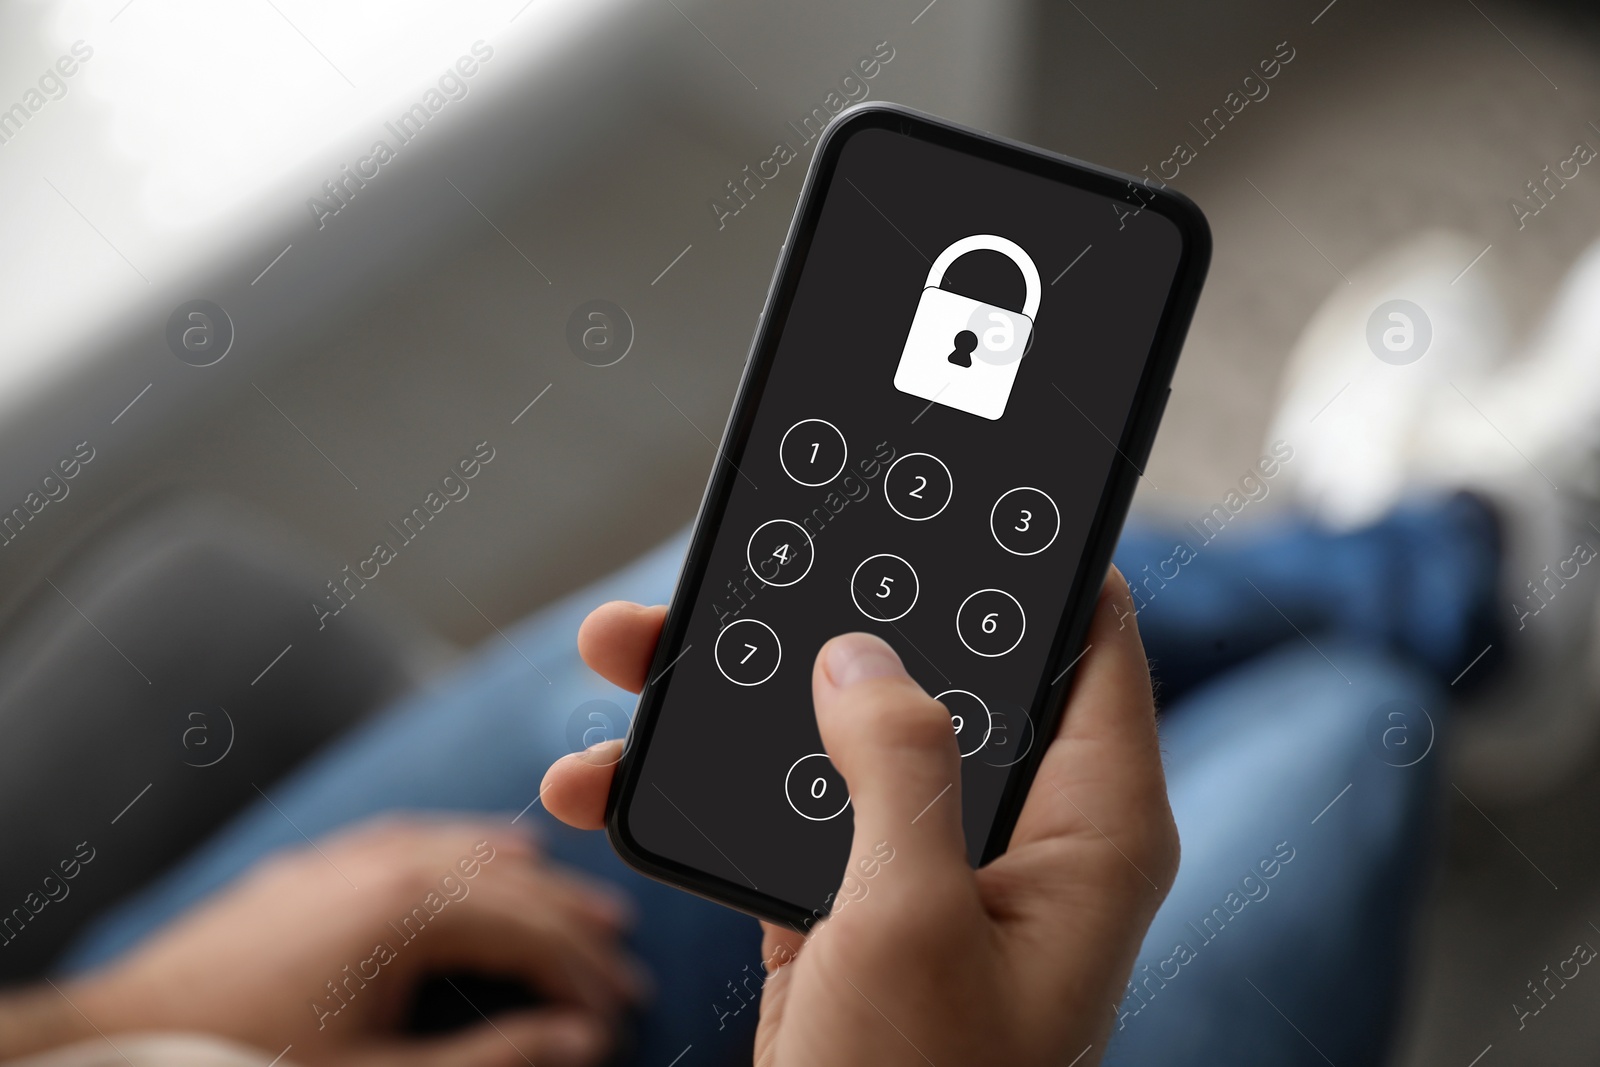 Image of Privacy protection. Man entering pin code on smartphone, closeup. Lock and numpad on screen